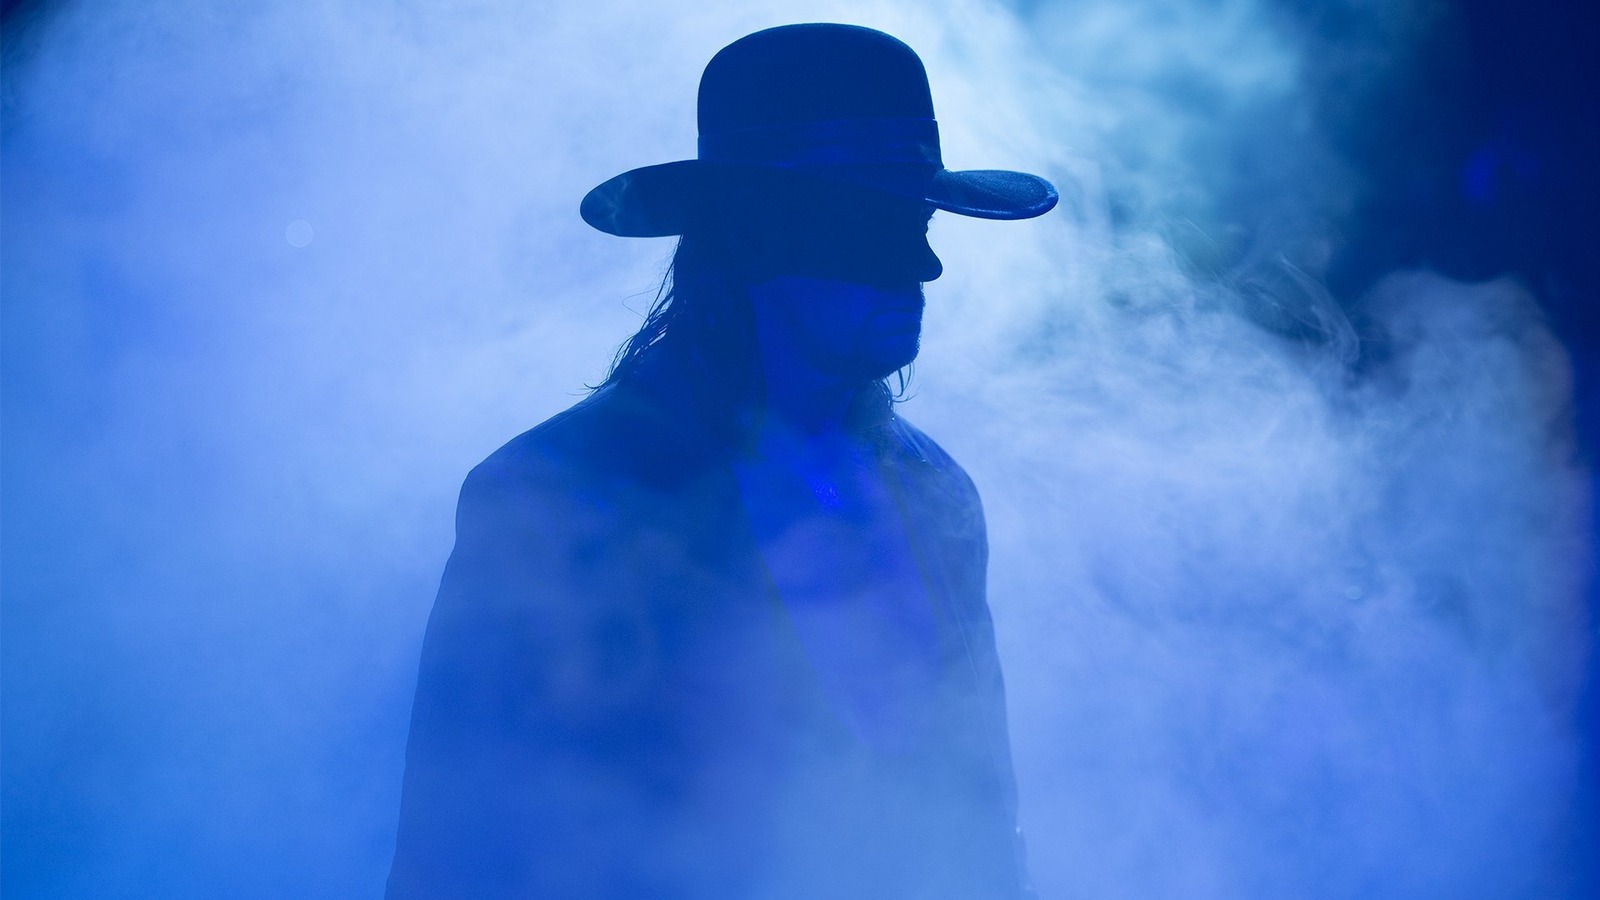 The Undertaker has no desire to get back in the ring